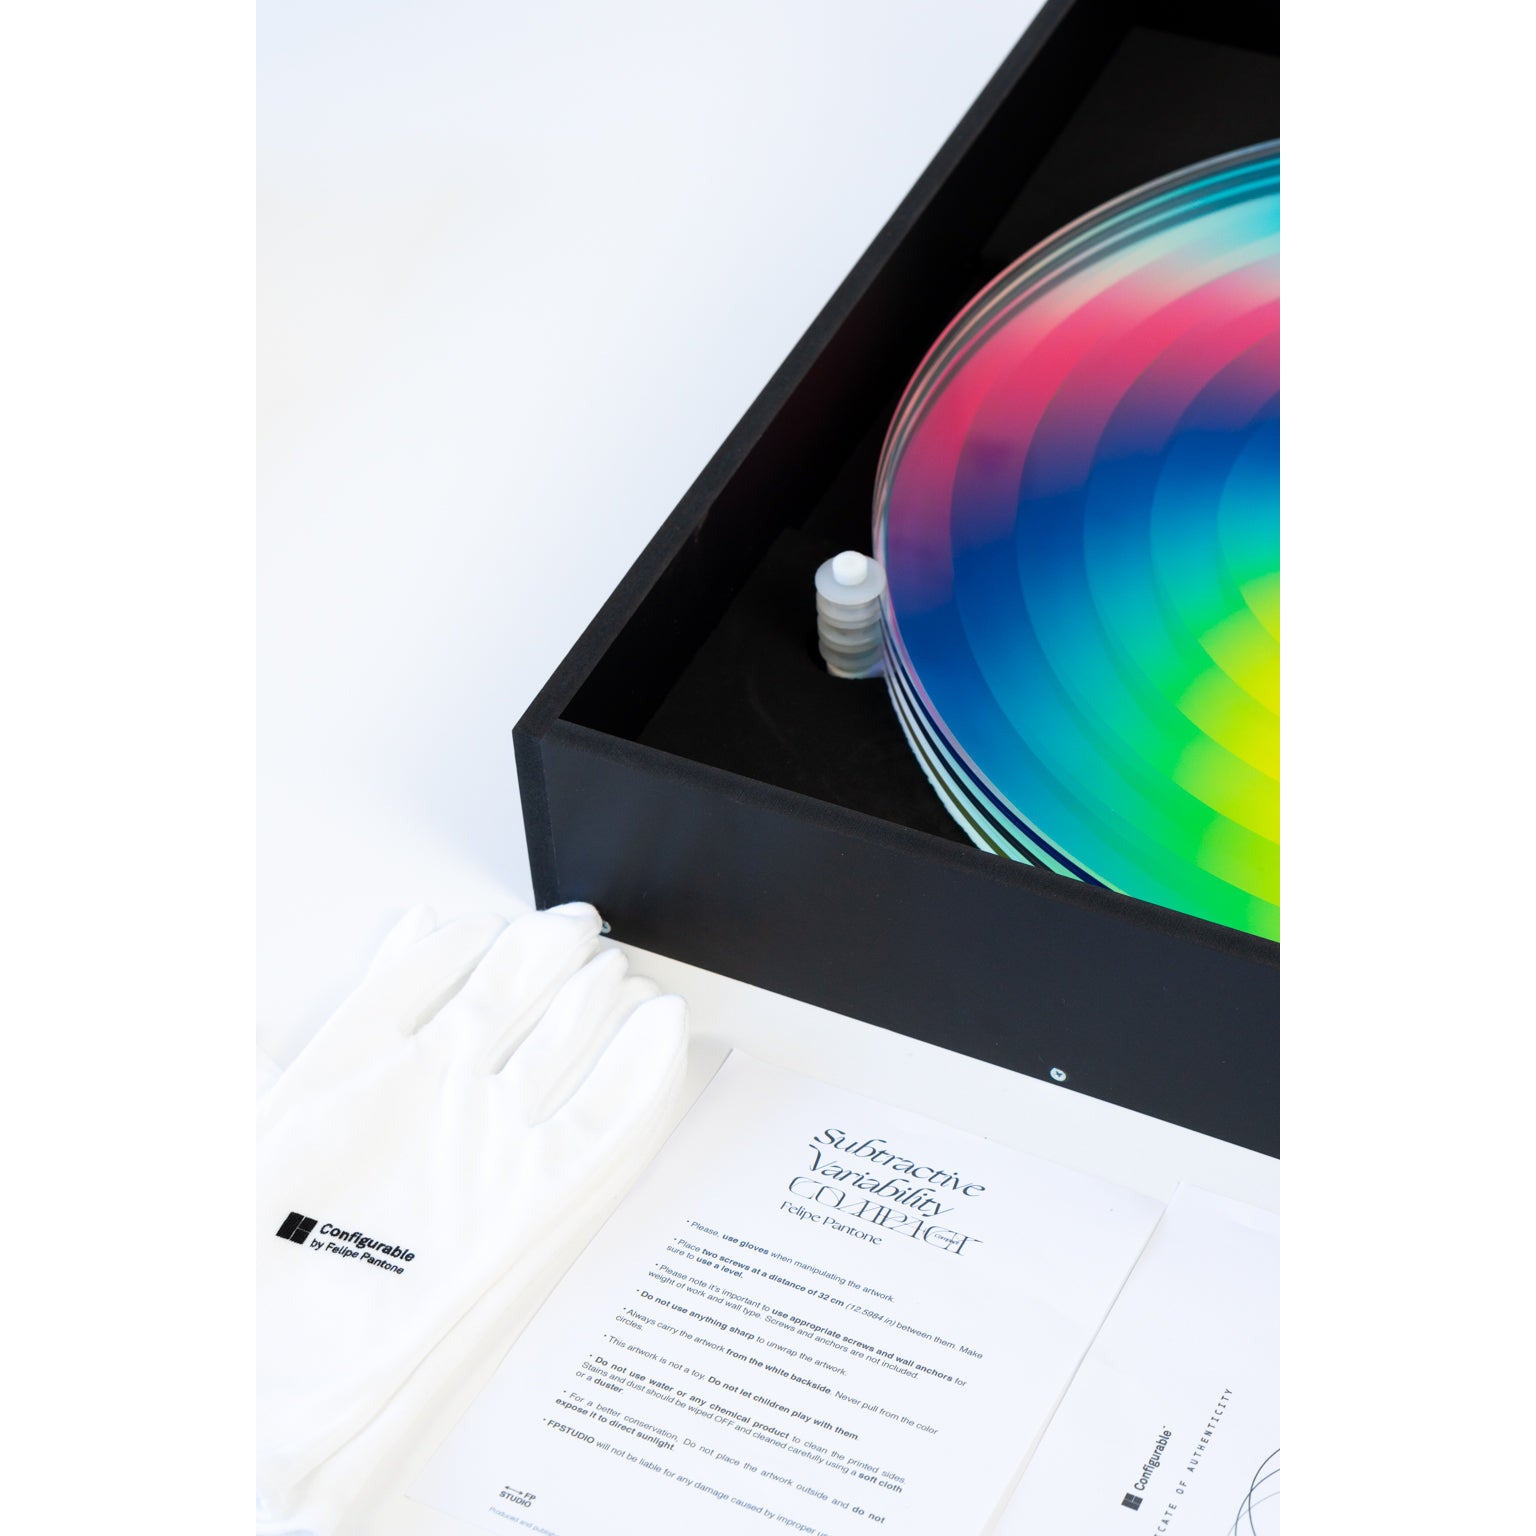 Felipe Pantone Subtractive Variability Compact, 2022 UV paint, PMMA, pulleys 18.5 x 18 x 2 in / 9.921 lb Edition of 200  Hand Signed & Numbered by the artist  Accompanied by Certificate of Authenticity, original artist packaging and gloves. Edition entirely created and produced at Felipe Pantone's Studio in Valencia, Spain.